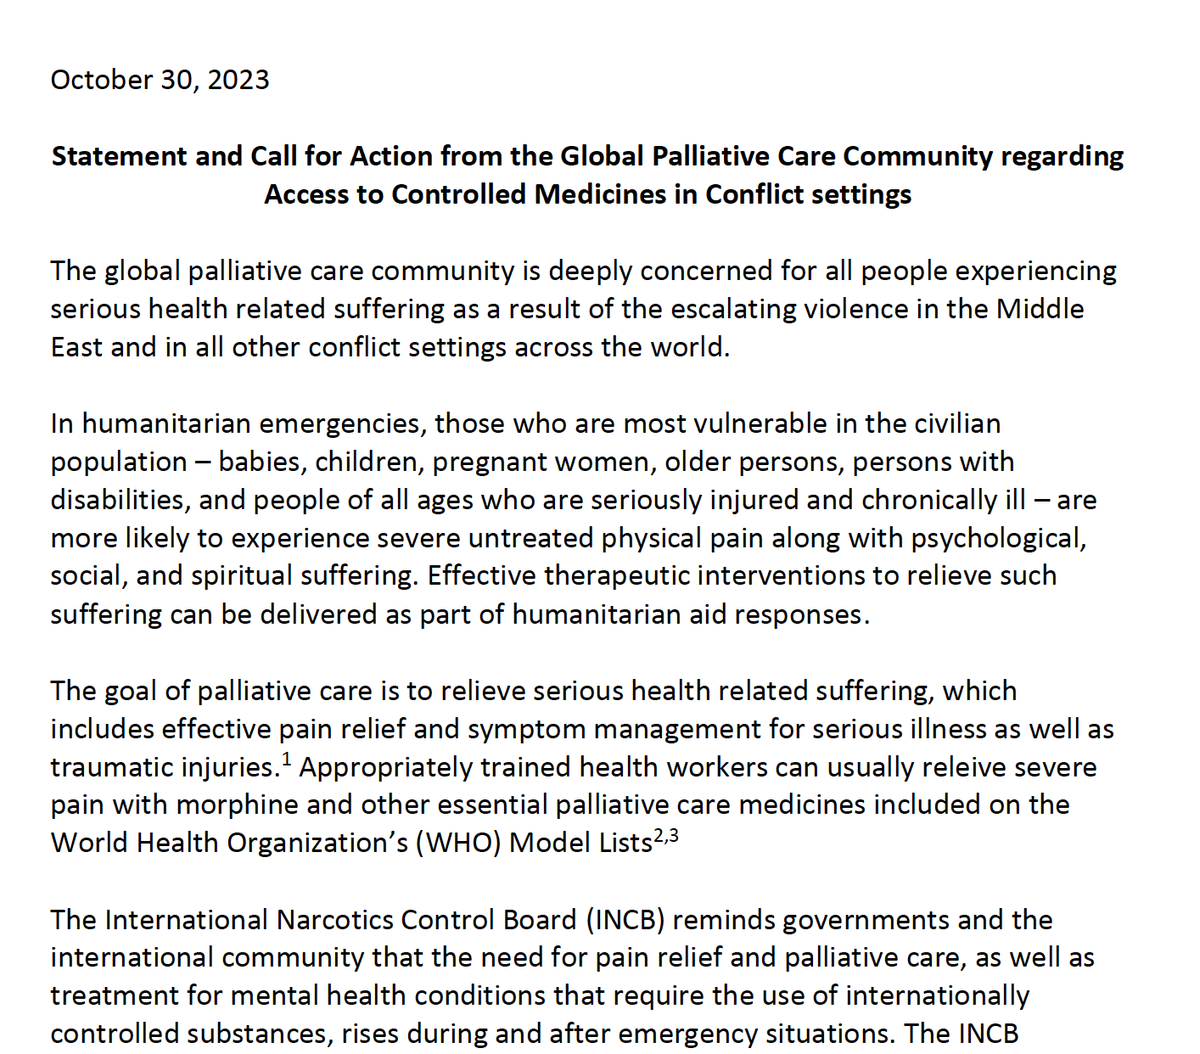 Statement and Call for Action from the Global Palliative Care Community regarding Access to Controlled Medicines in Conflict settings @IAHPC @WHPCA @PallChase @ICPCN @MaruzzaCongress @palliumindia @PatchPalliative @KublerRoss @INCB_President @UNODC_PTRS tinyurl.com/ynrnwemr